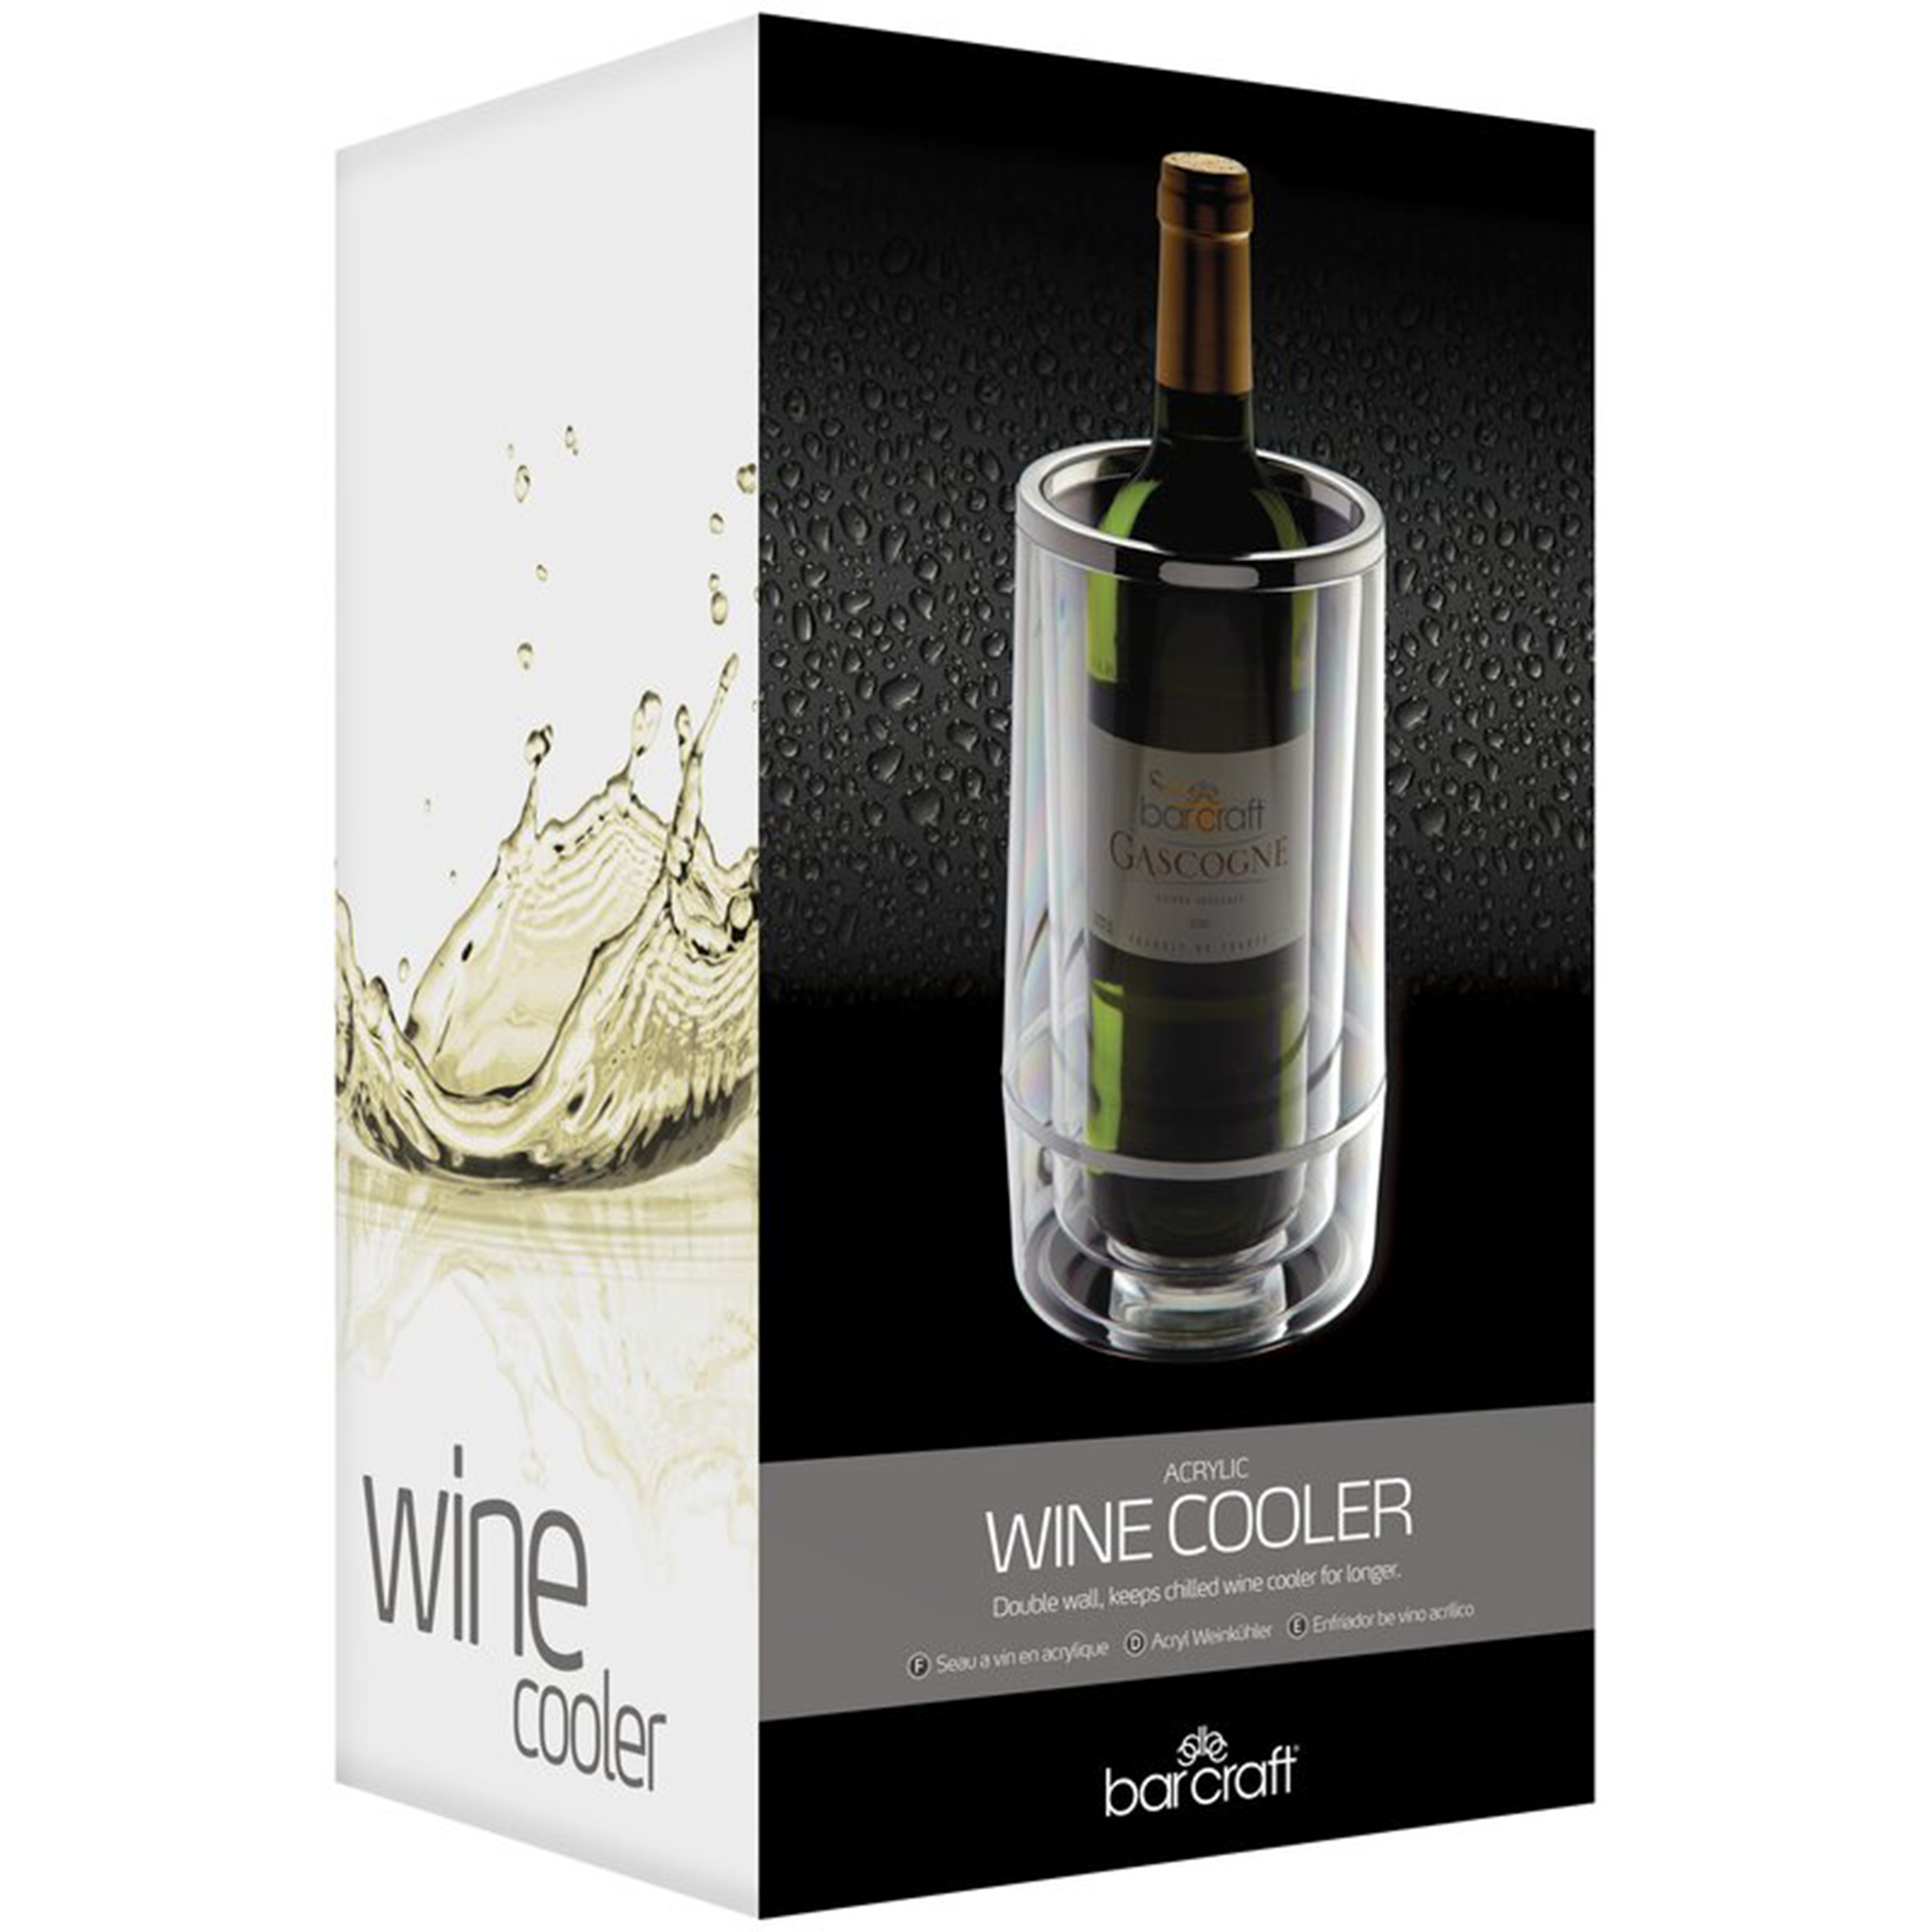 the wine cooler in it's box